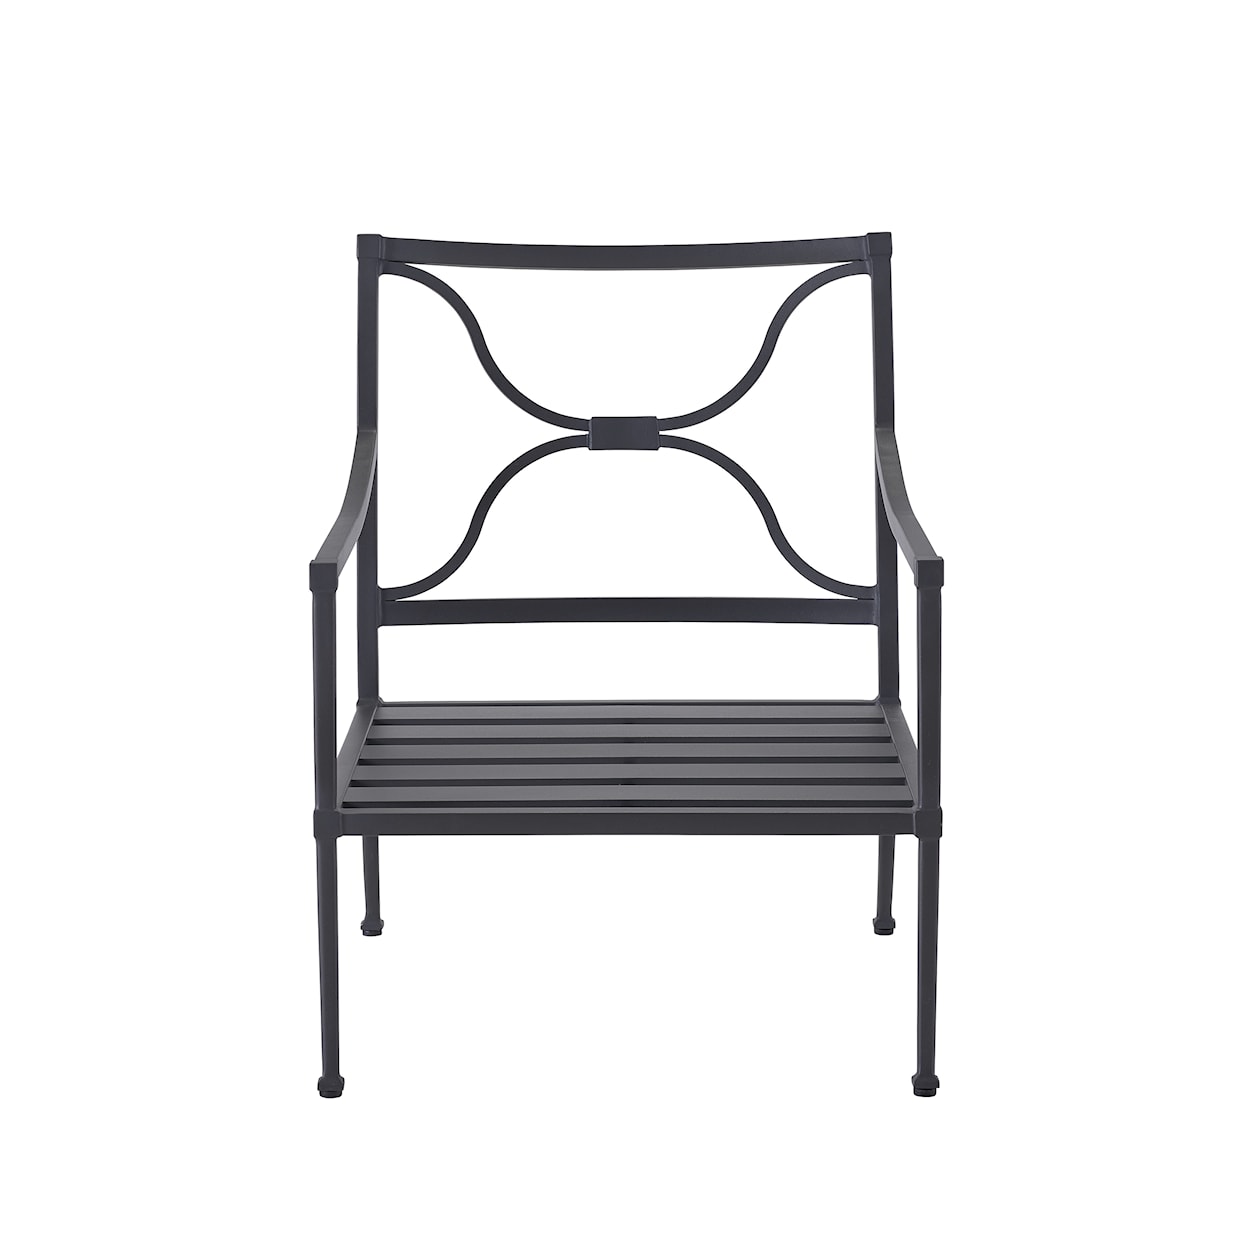 Universal Coastal Living Outdoor Outdoor Living Lounge Chair